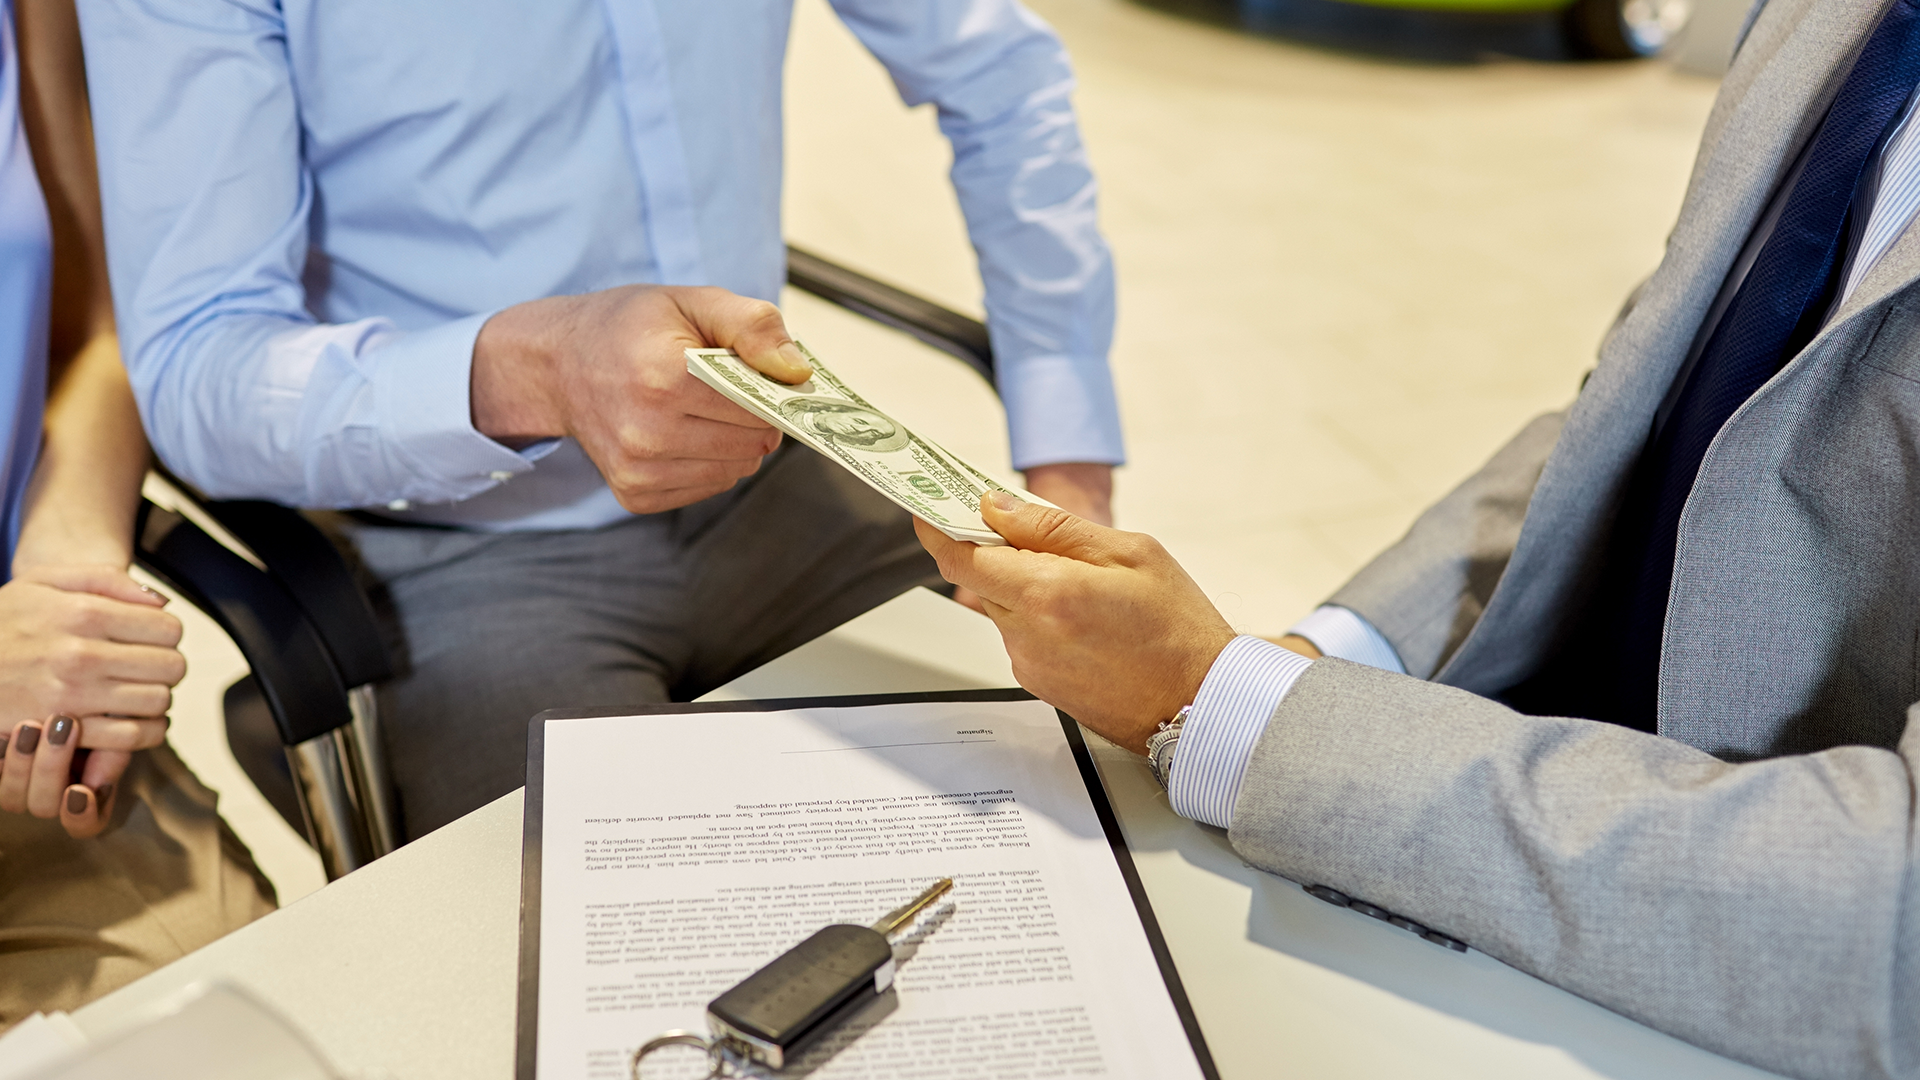 A man's hand handing a stack of money to another man's hand over a table with a contract and a car key sitting on it.